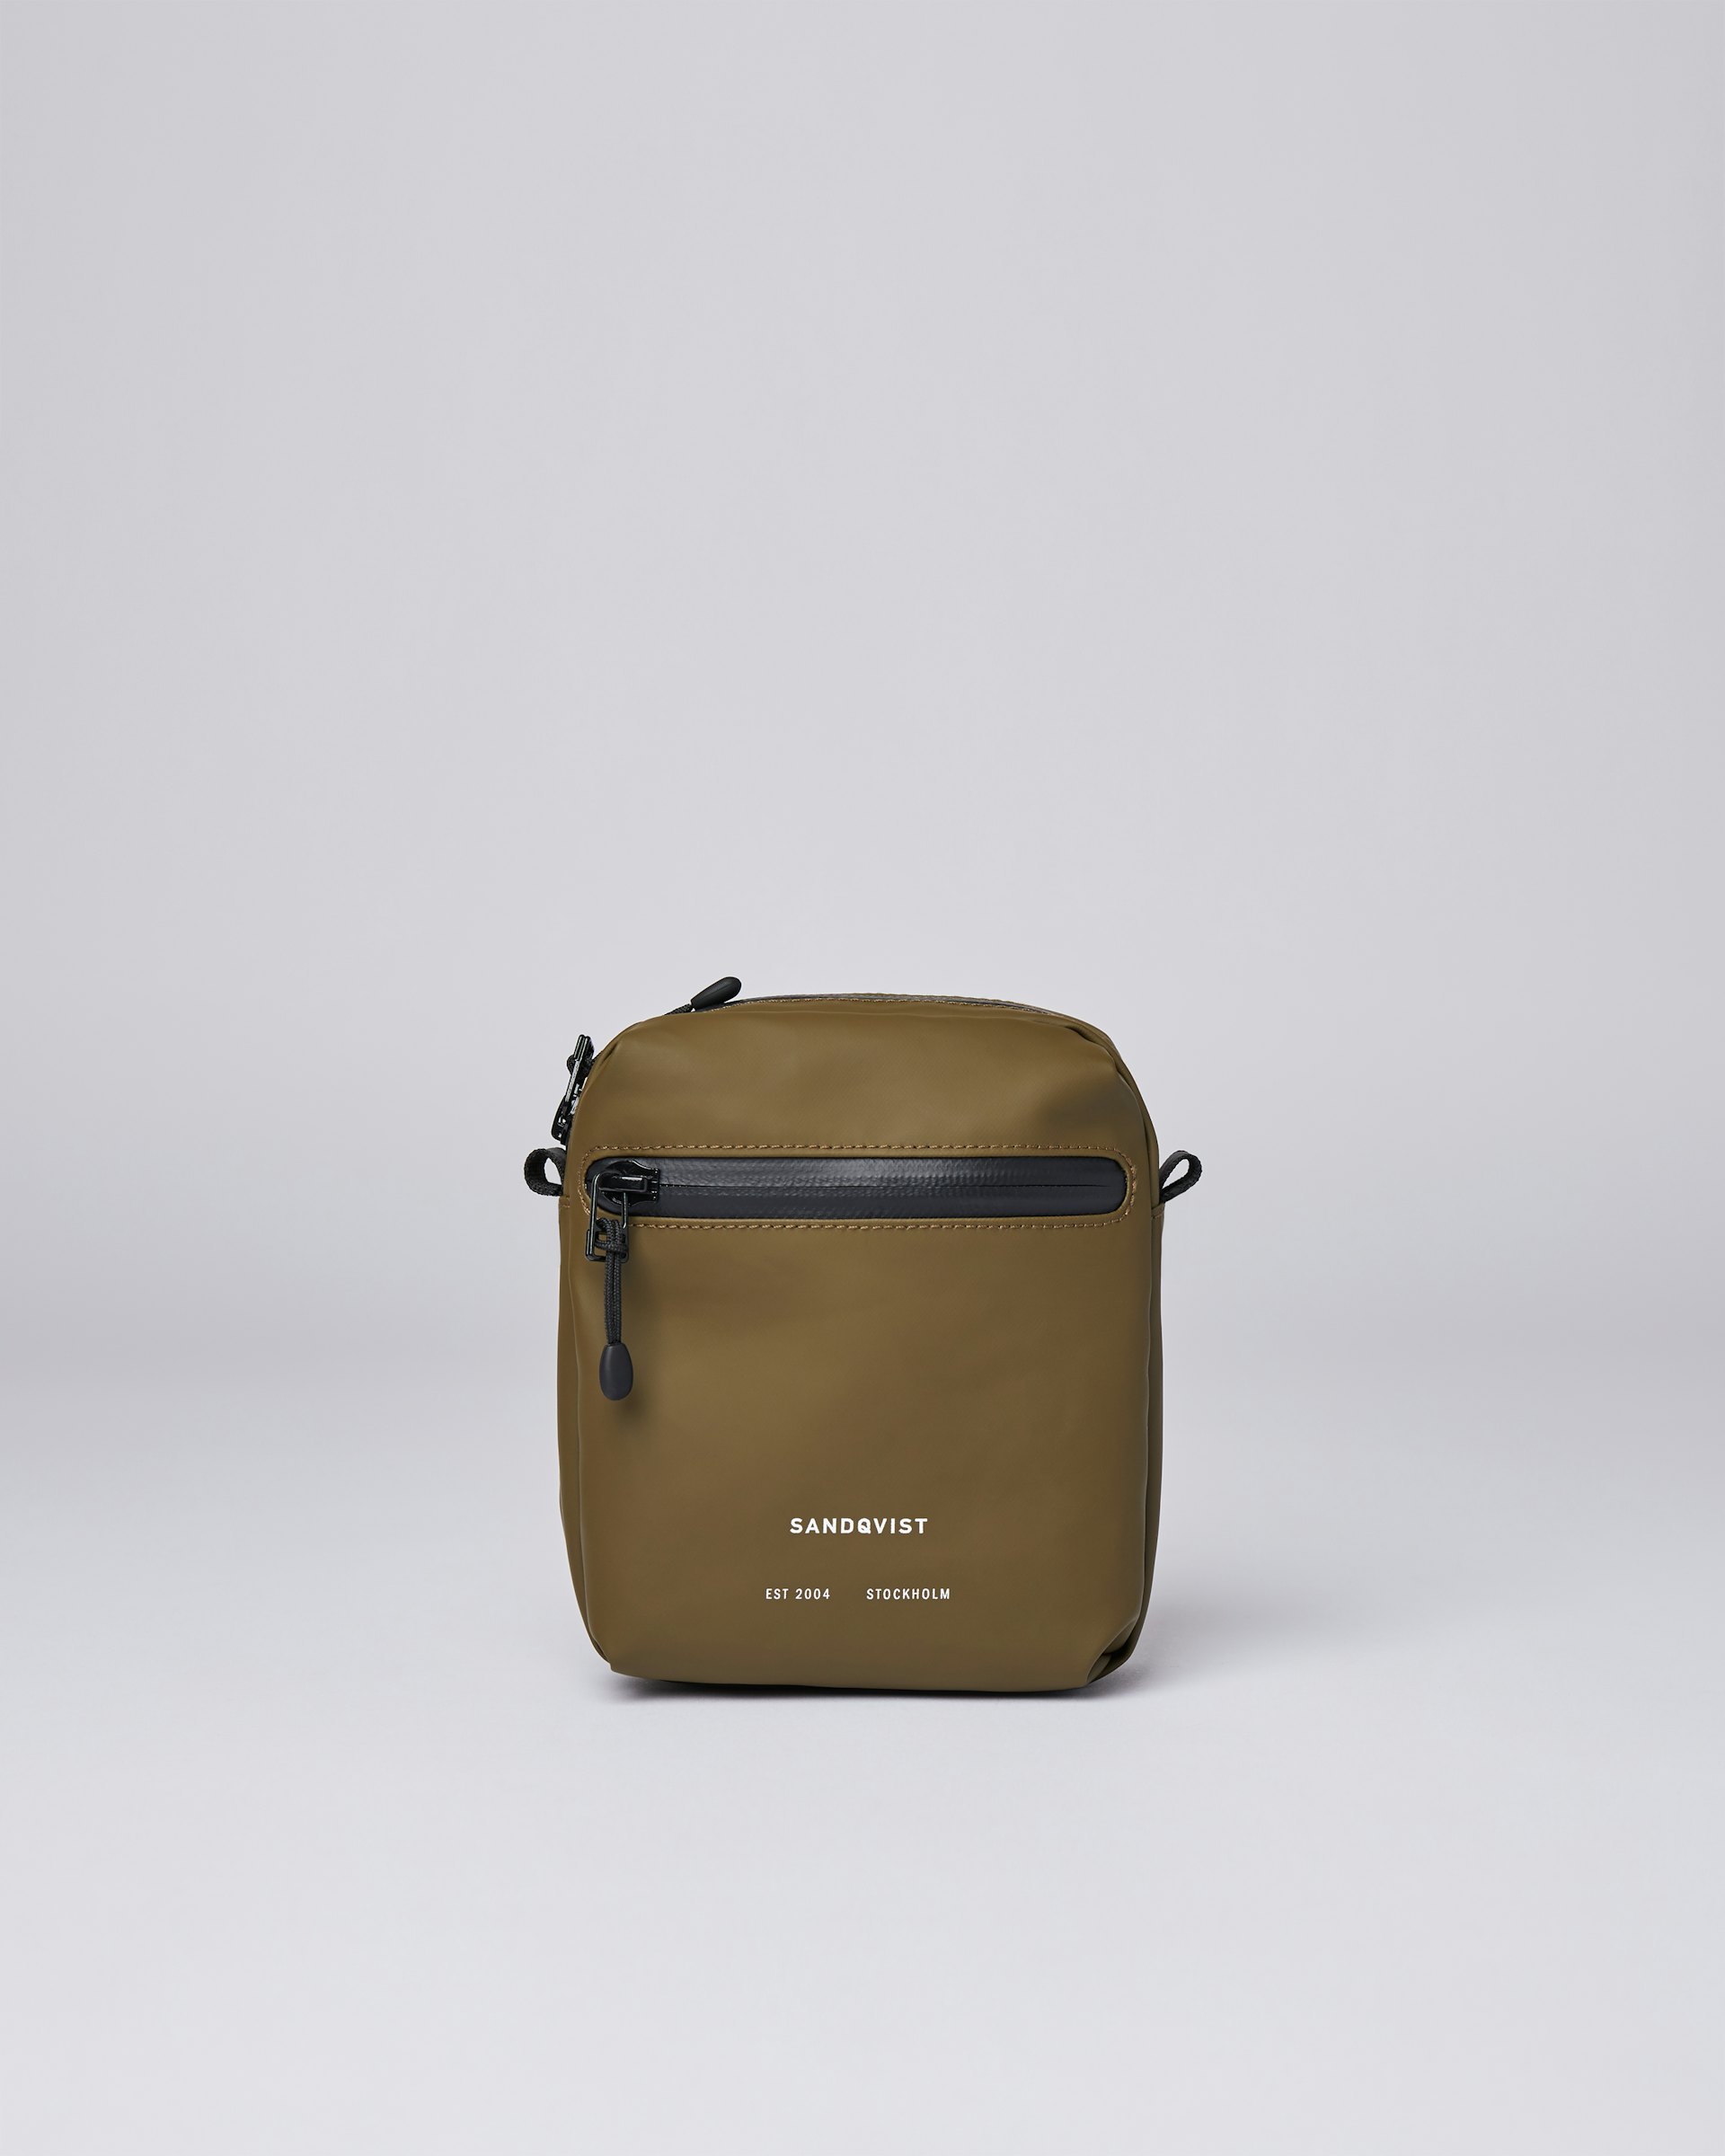 Poe belongs to the category Shoulder bags and is in color olive (1 of 5)